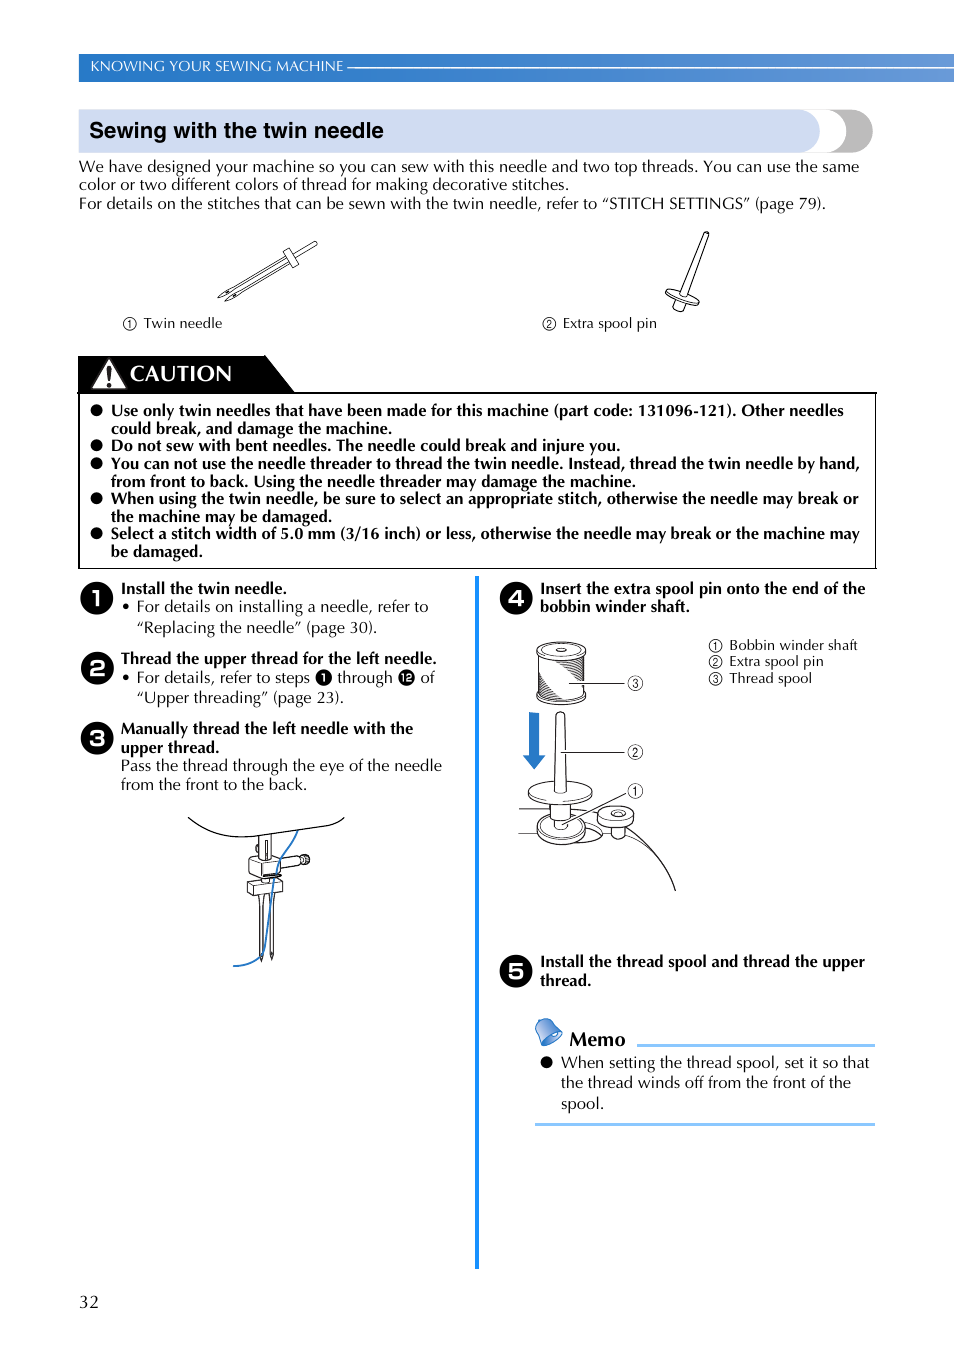 Sewing with the twin needle, Caution | Brother XR1300 User Manual | Page 34 / 112